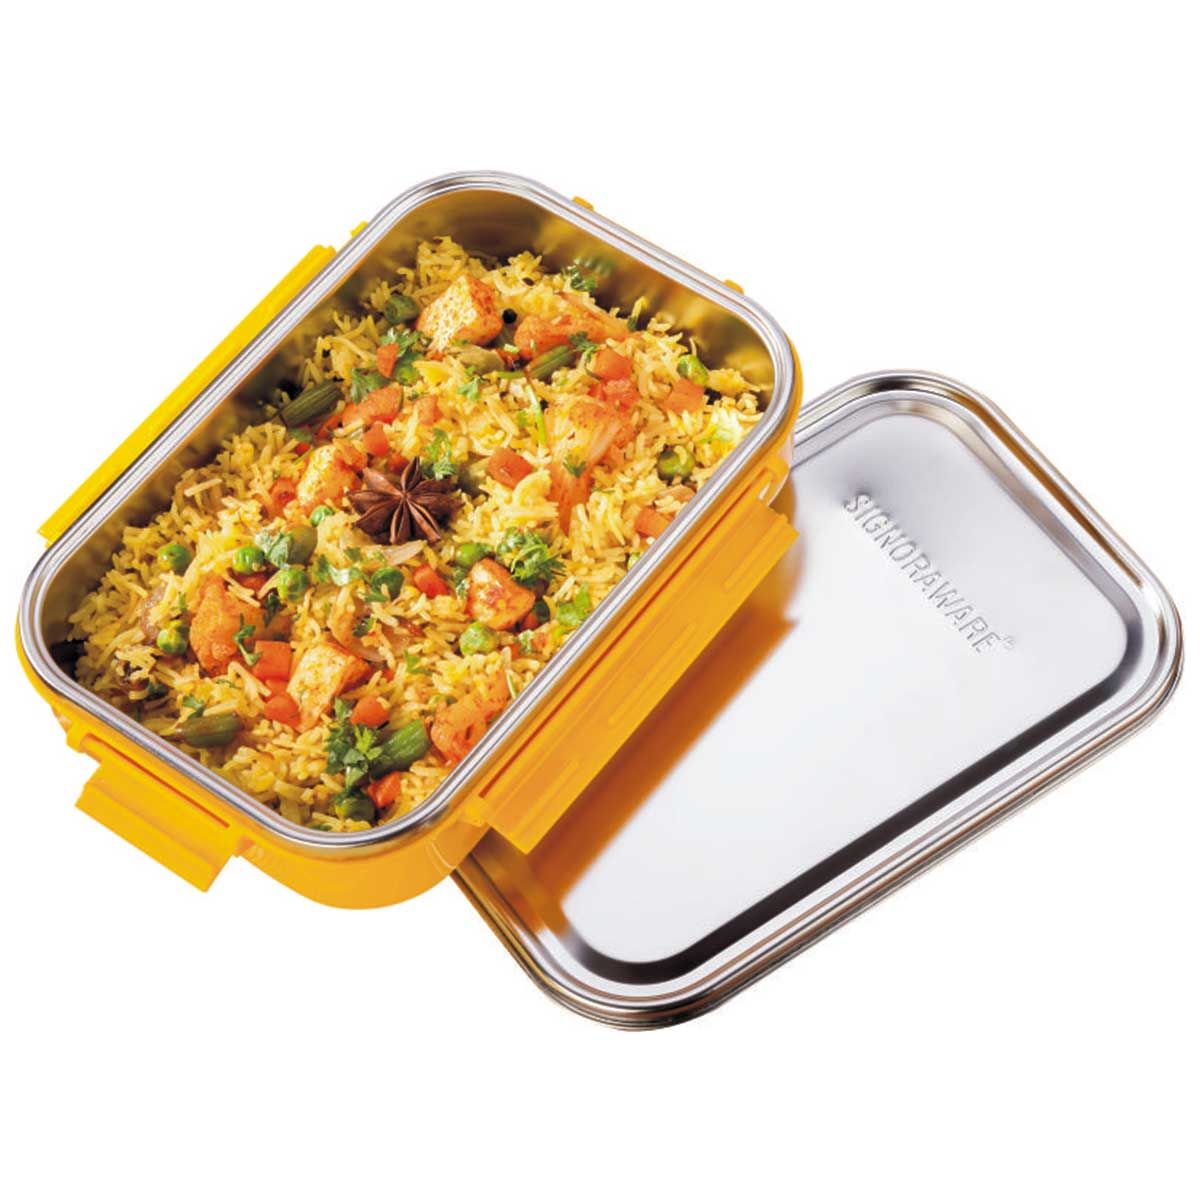 Signoraware Crispy with Steel Lid Lunch box 1000ml - 3738